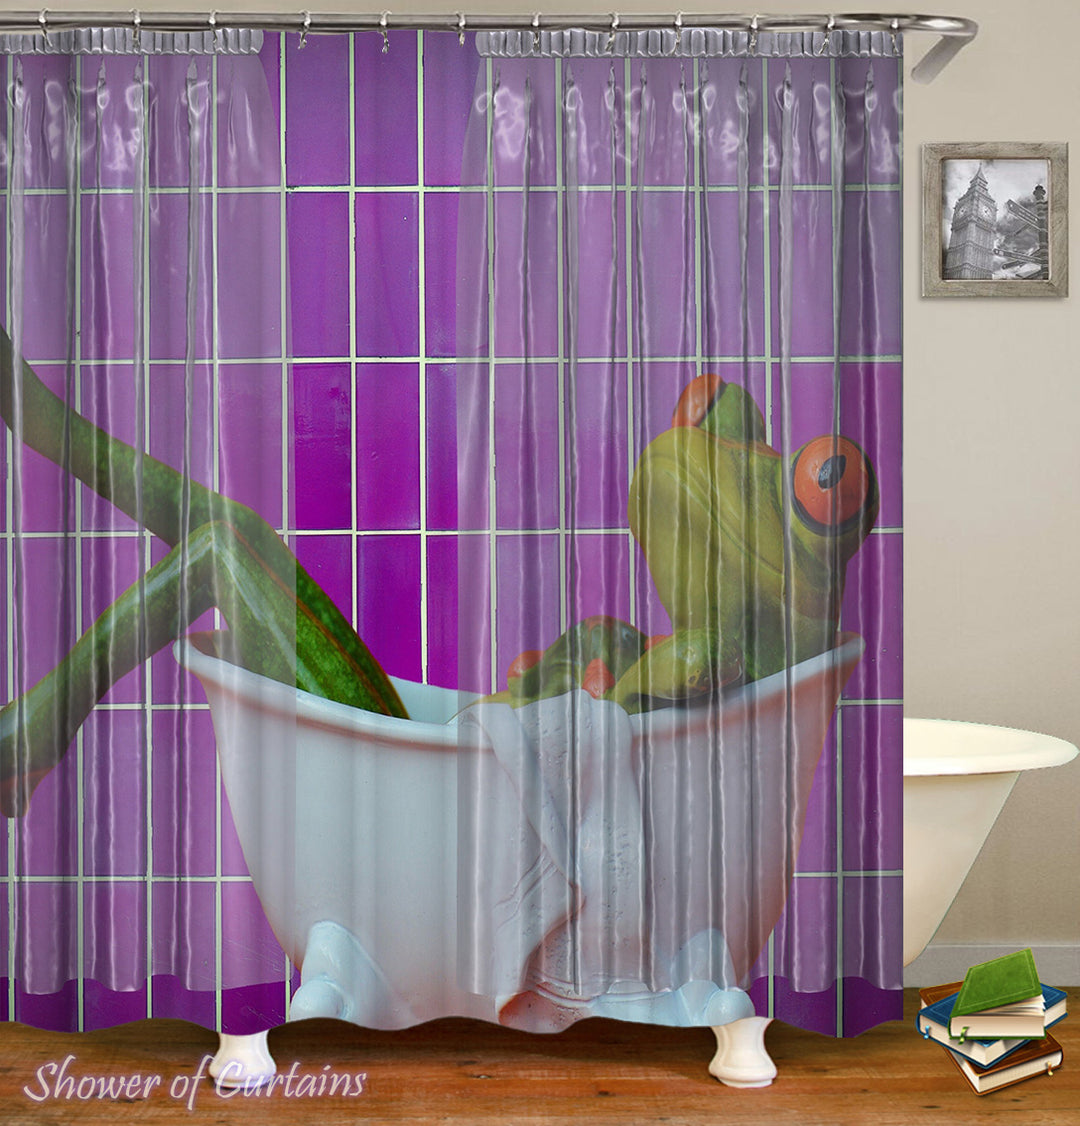 Shower Curtain With a Frog Taking A Bath